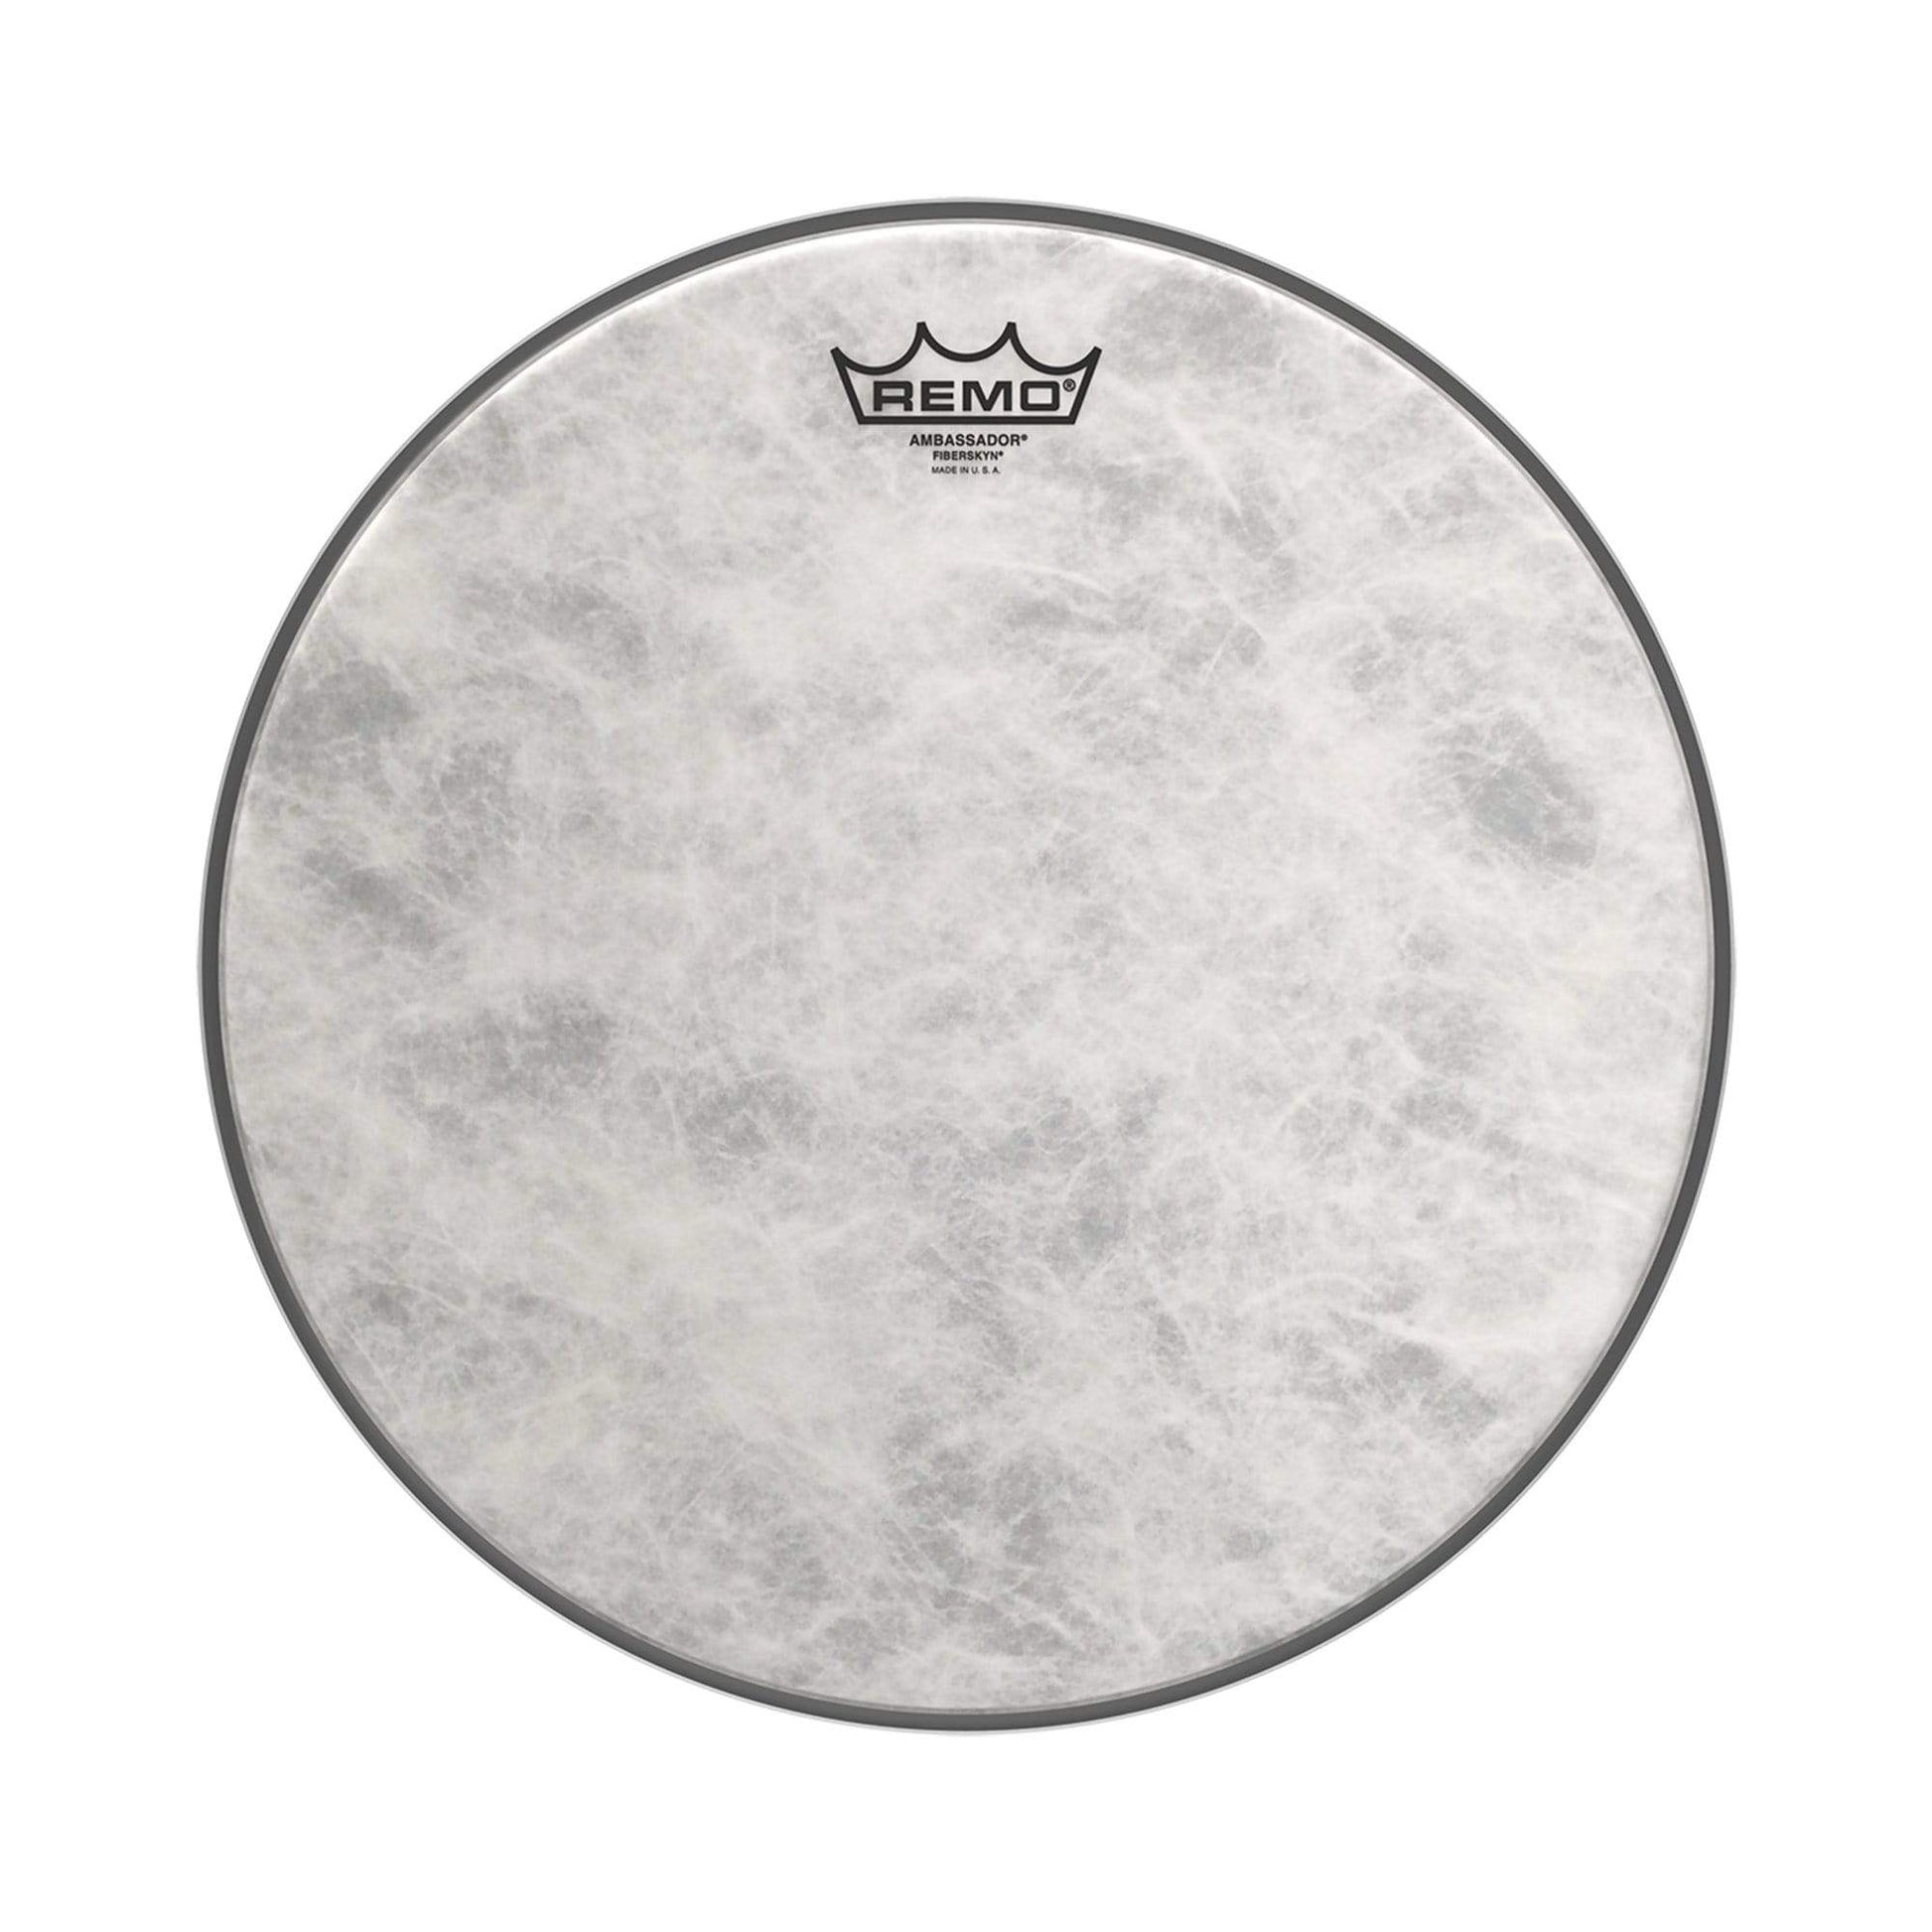 Remo 15" Ambassador Fiberskyn Drumhead Drums and Percussion / Parts and Accessories / Heads